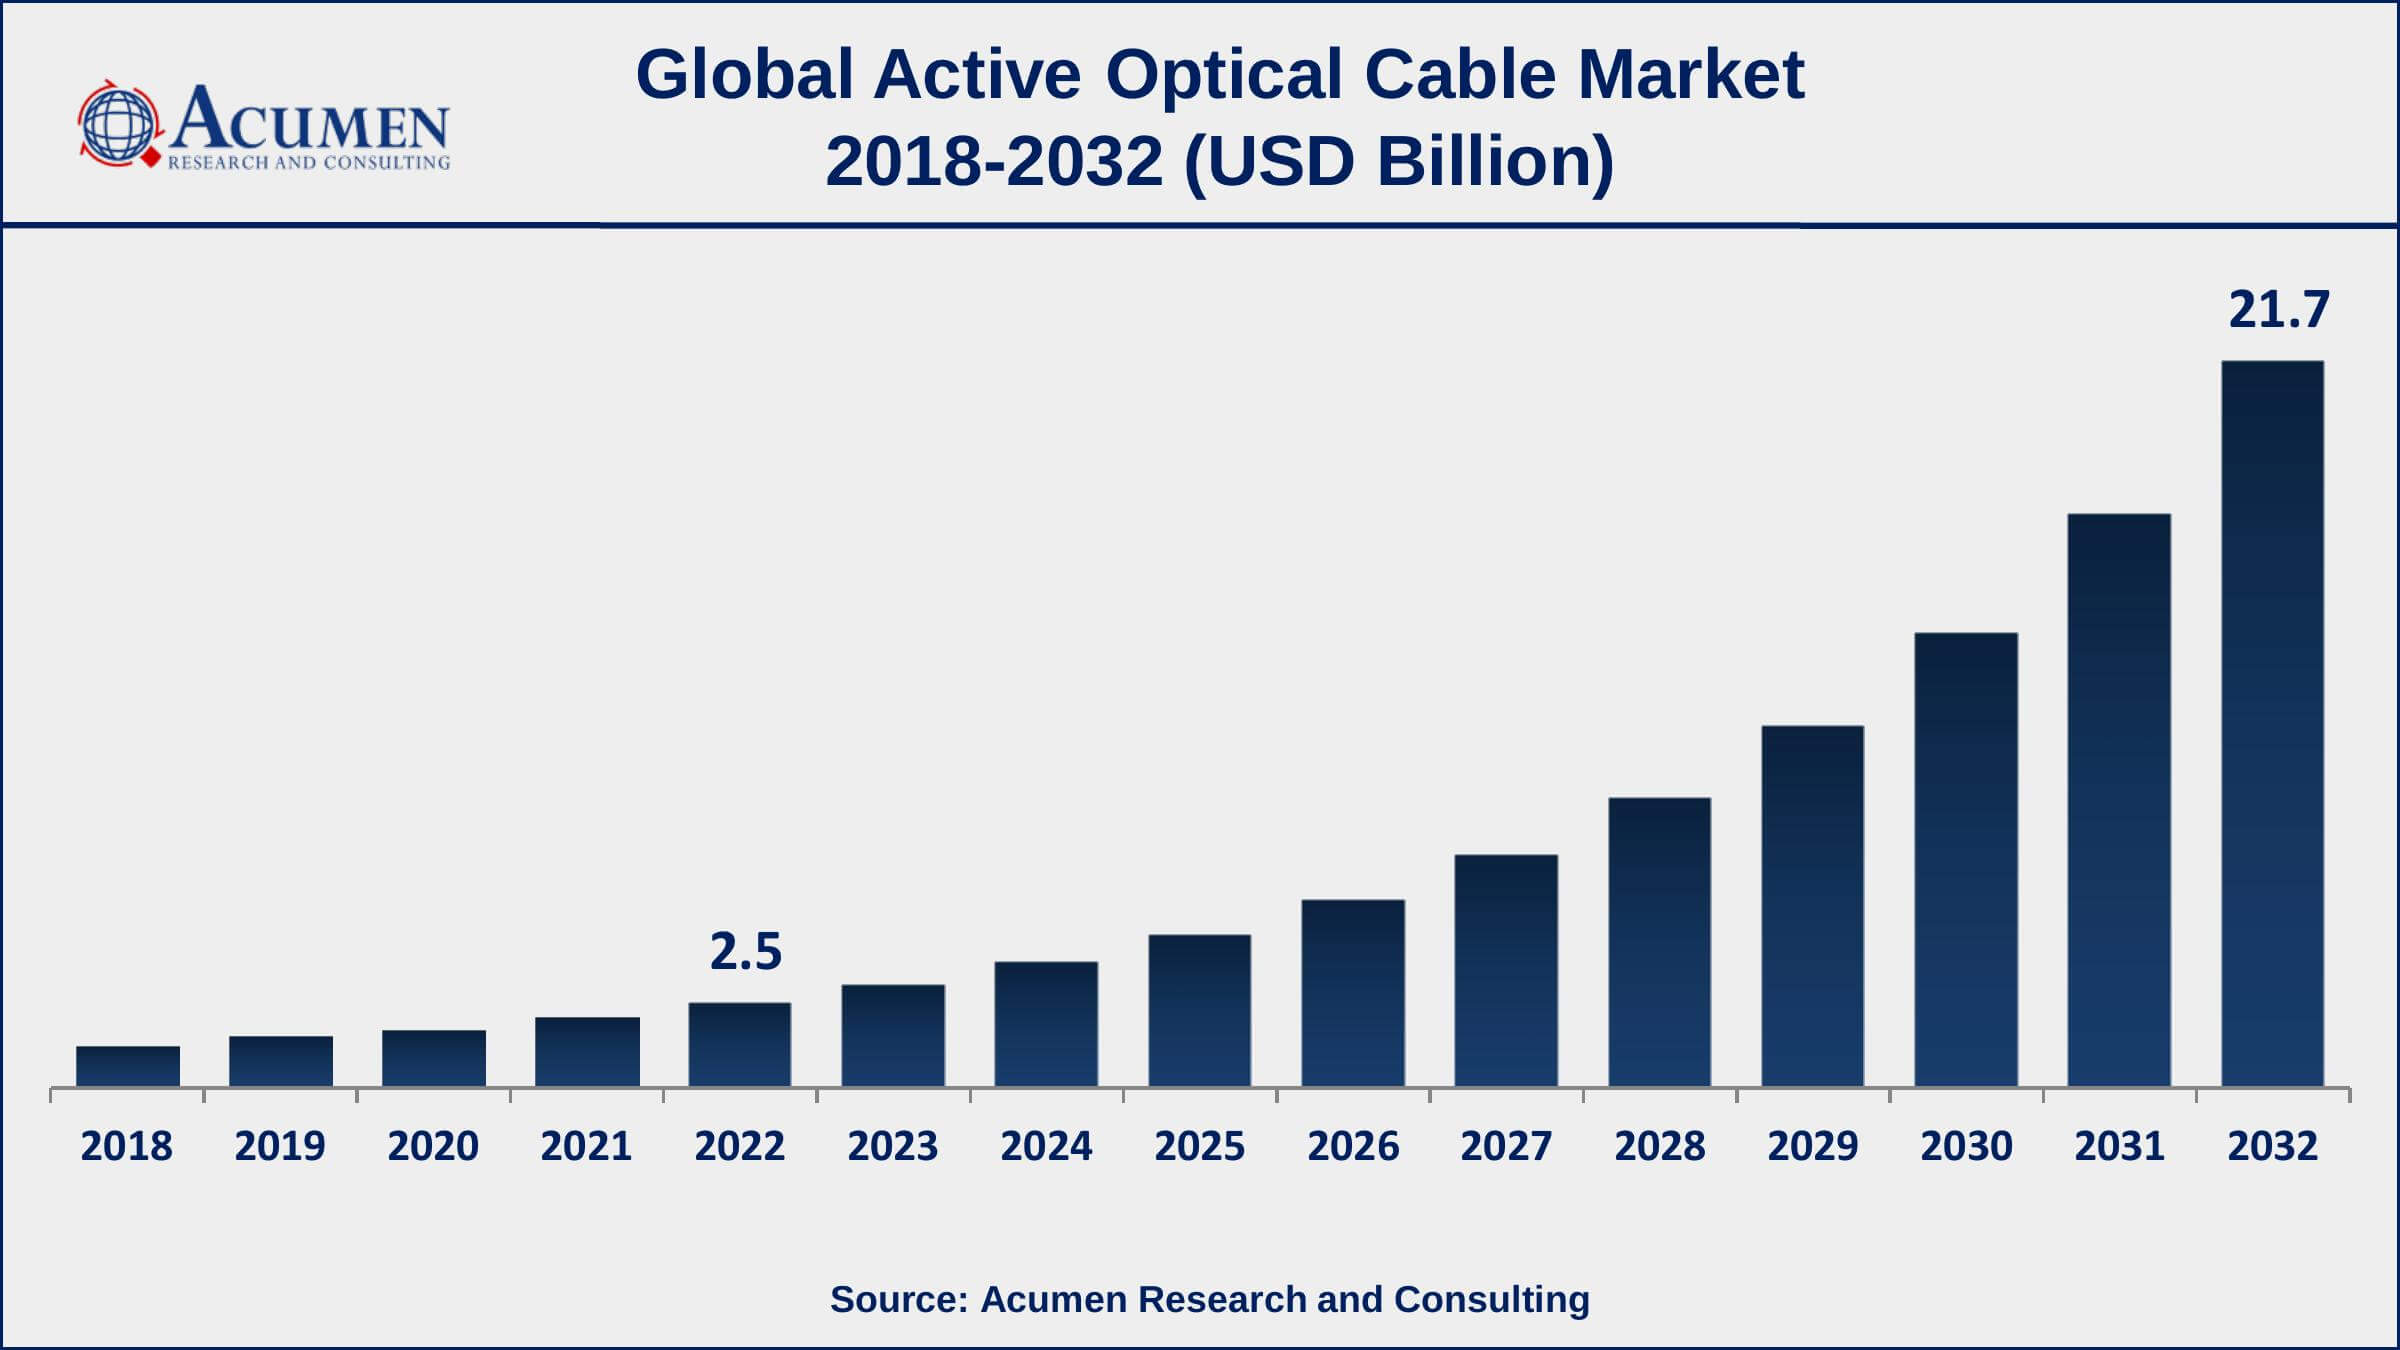 Active Optical Cable Market Drivers